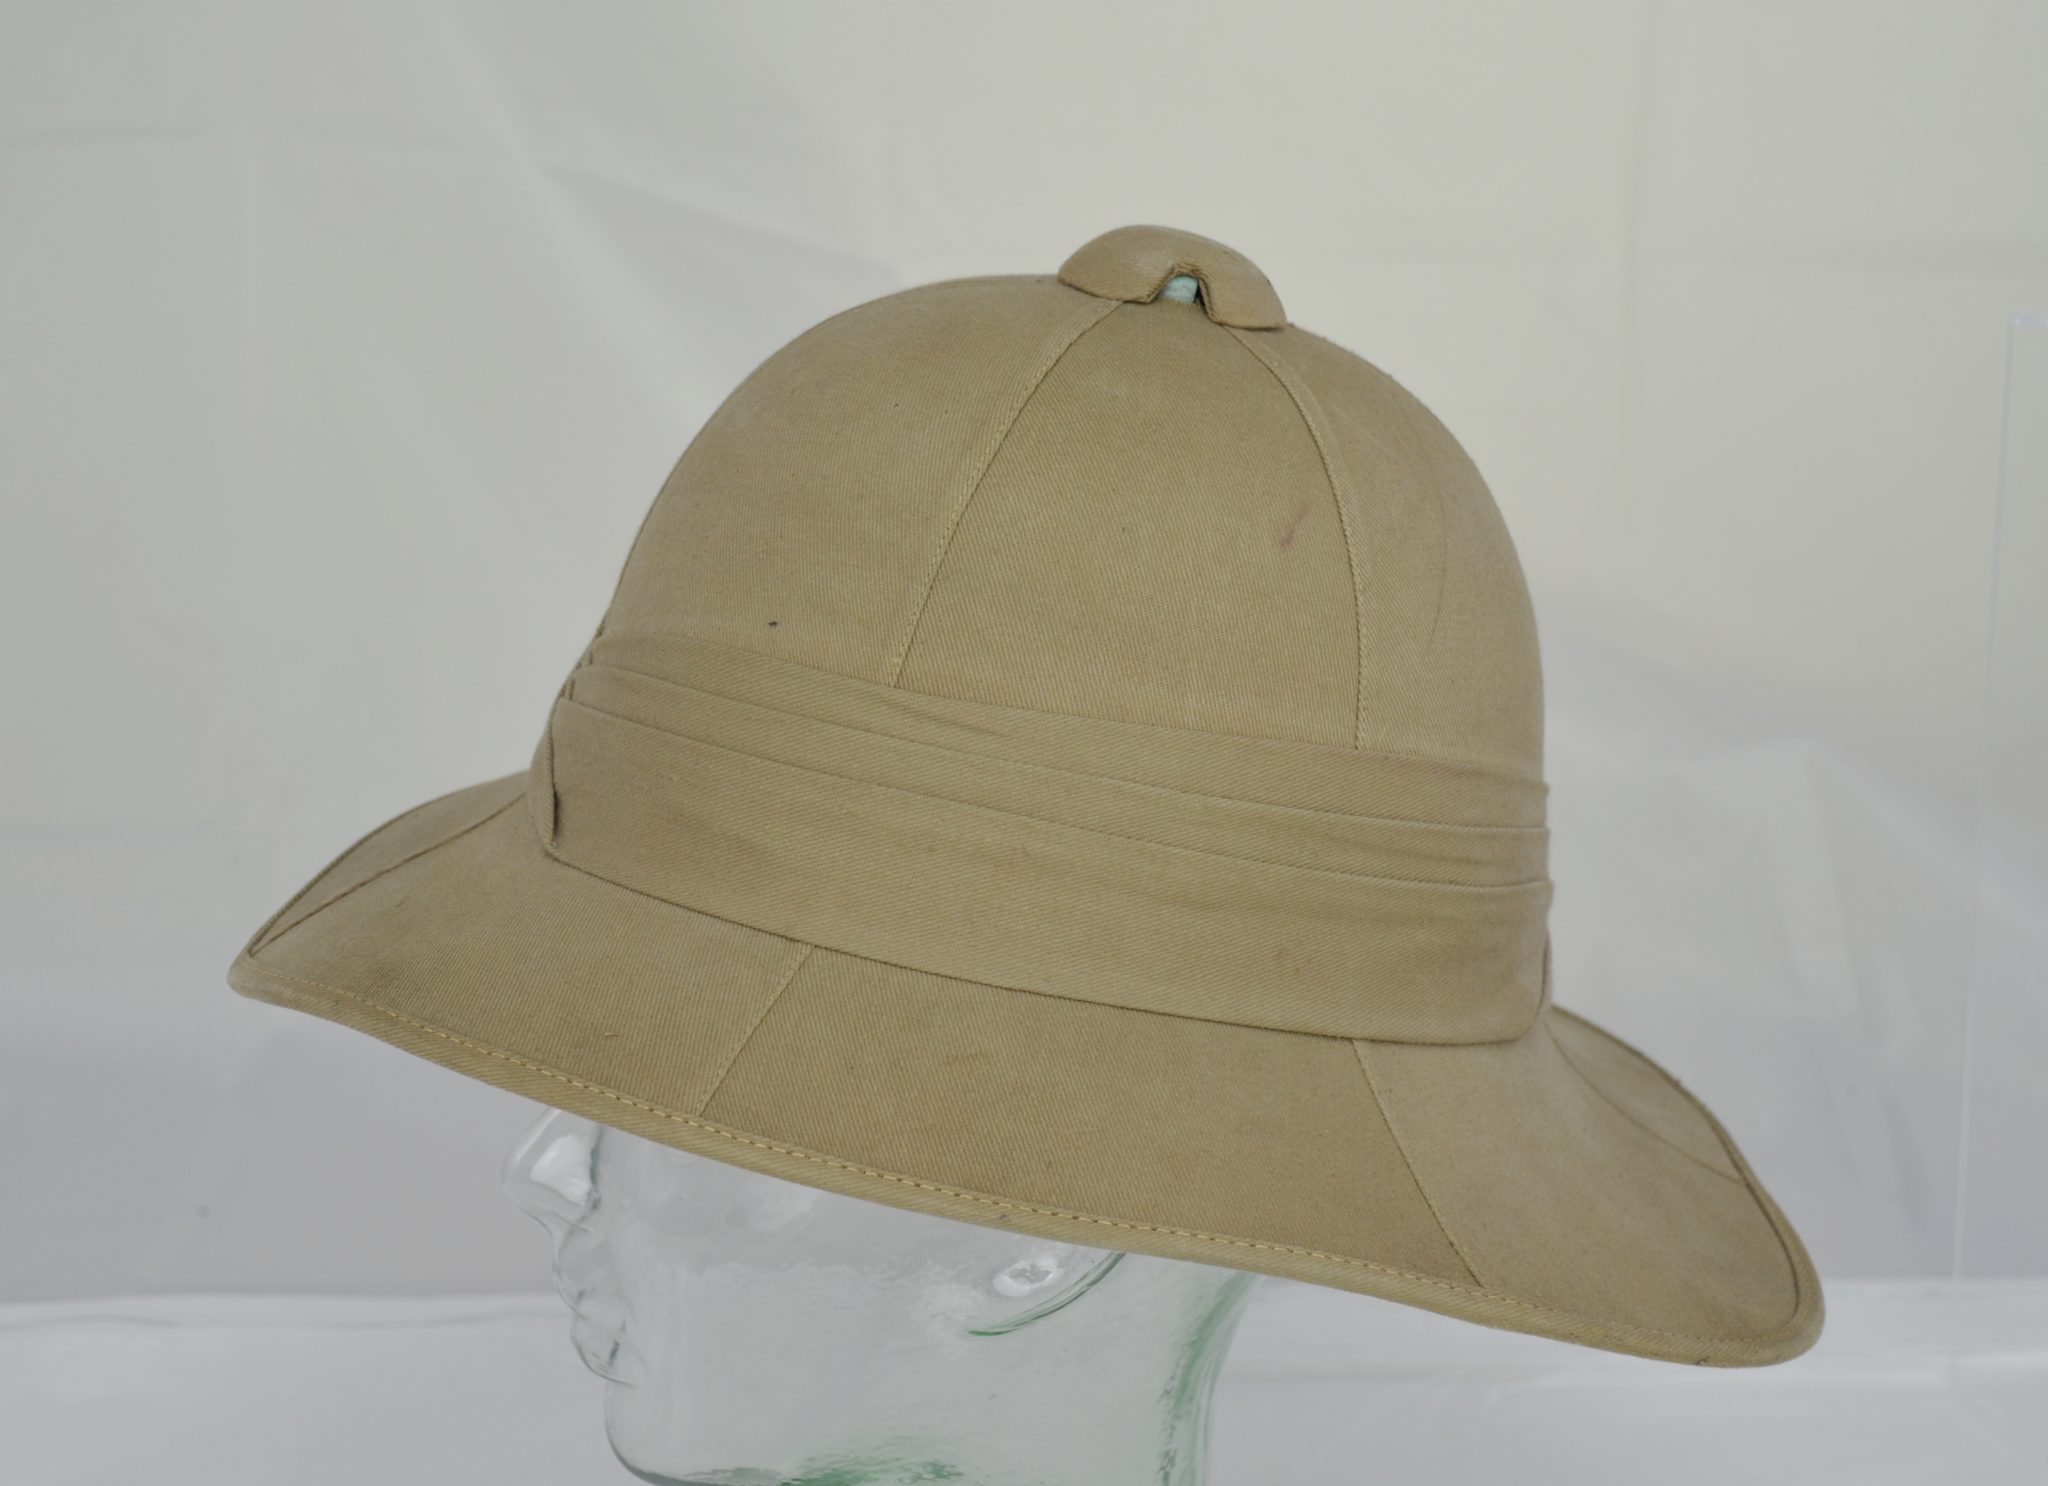 Army Issue WW2 Pith Helmet Made By E.W.Vero - Sally Antiques